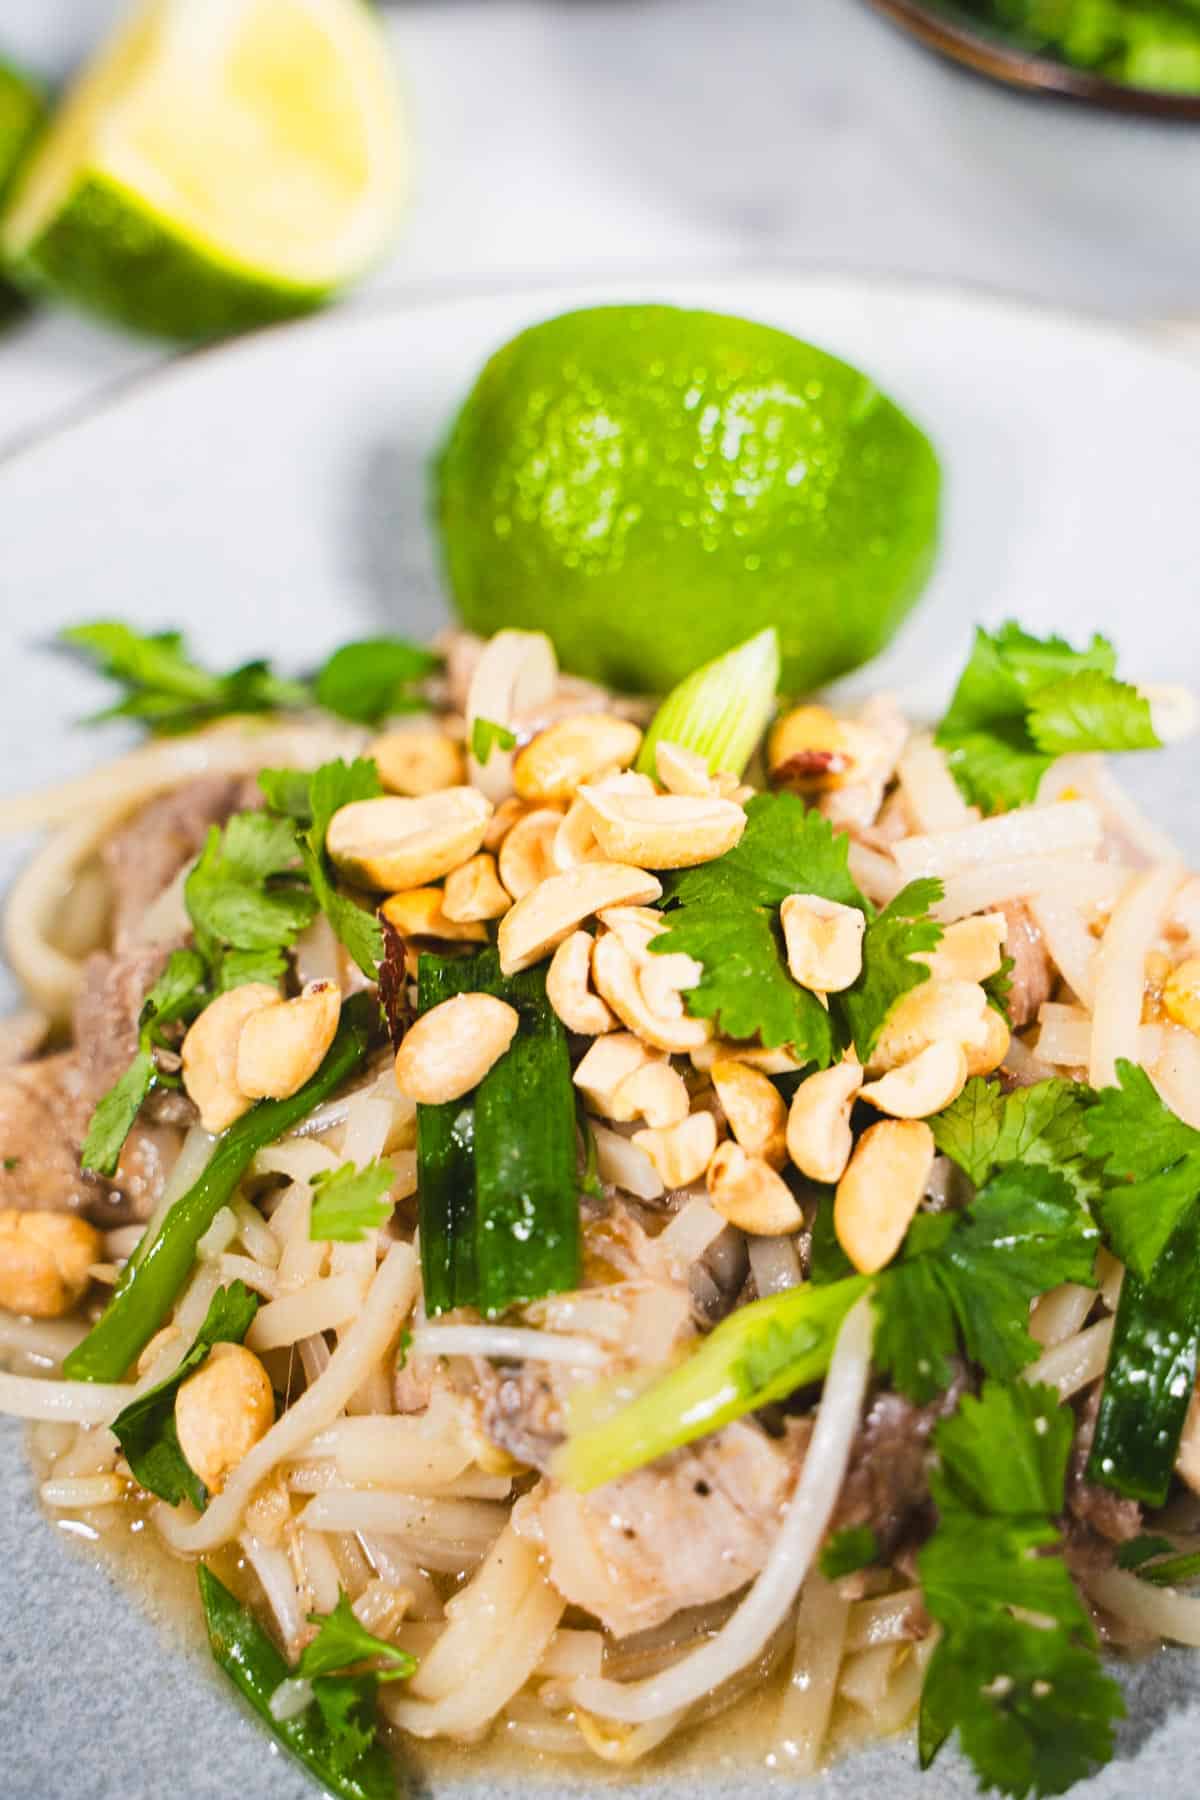 Slow cooker Pork Pad Thai using Thai tamarind paste on a plate garnished with dry roasted peanuts, cilantro and lime slices.